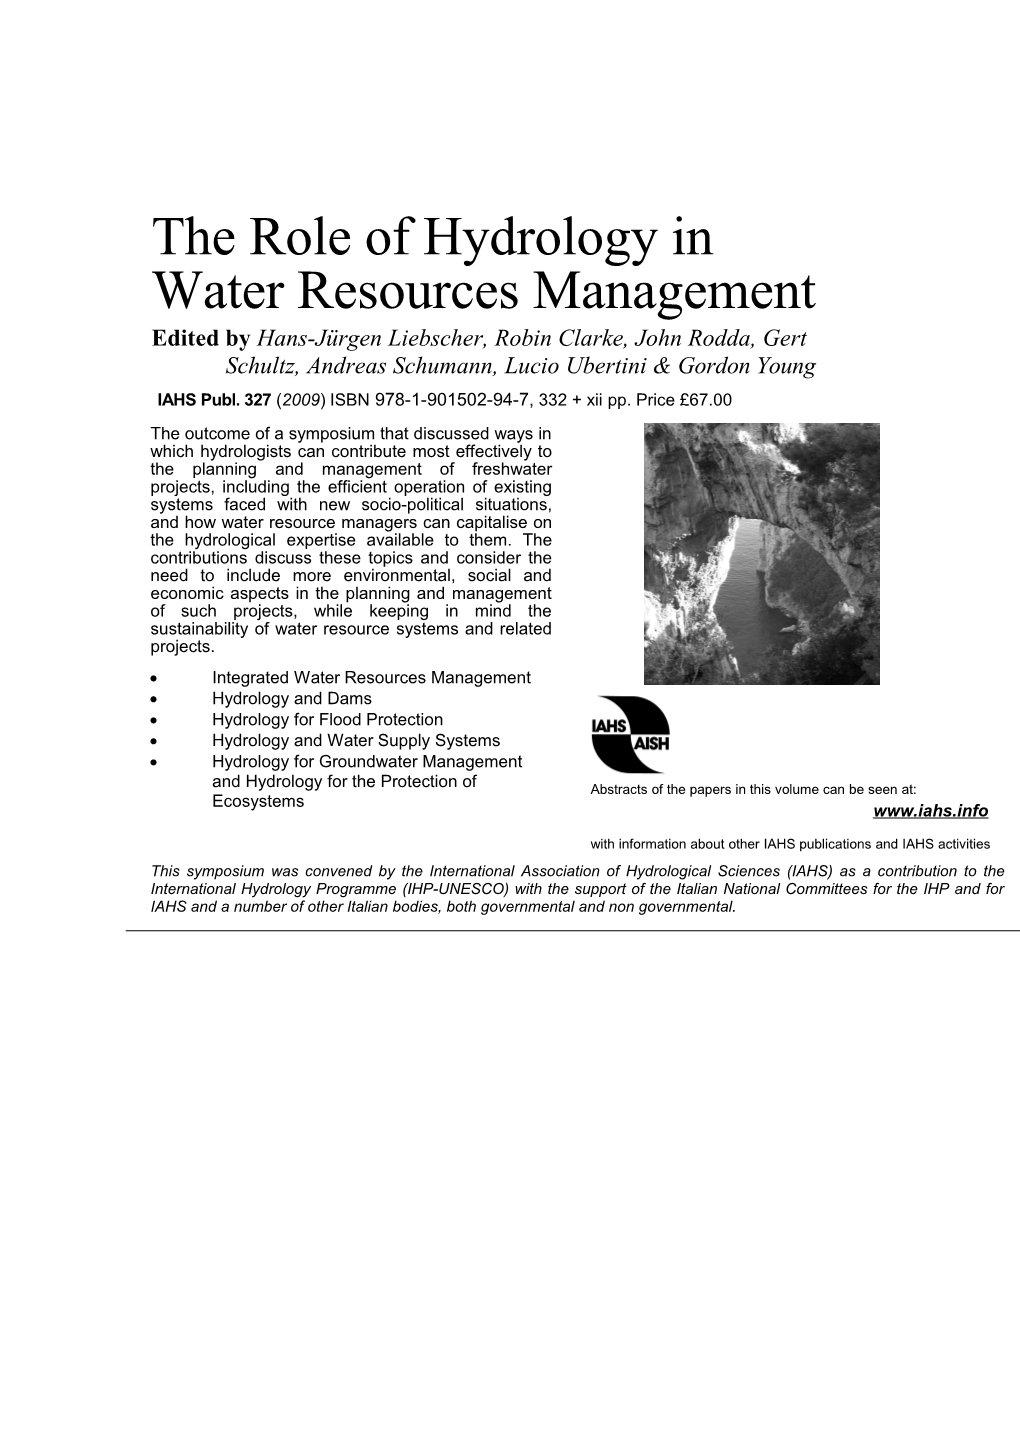 The Role of Hydrology in Water Resources Management (Proceedings of a Symposium Held